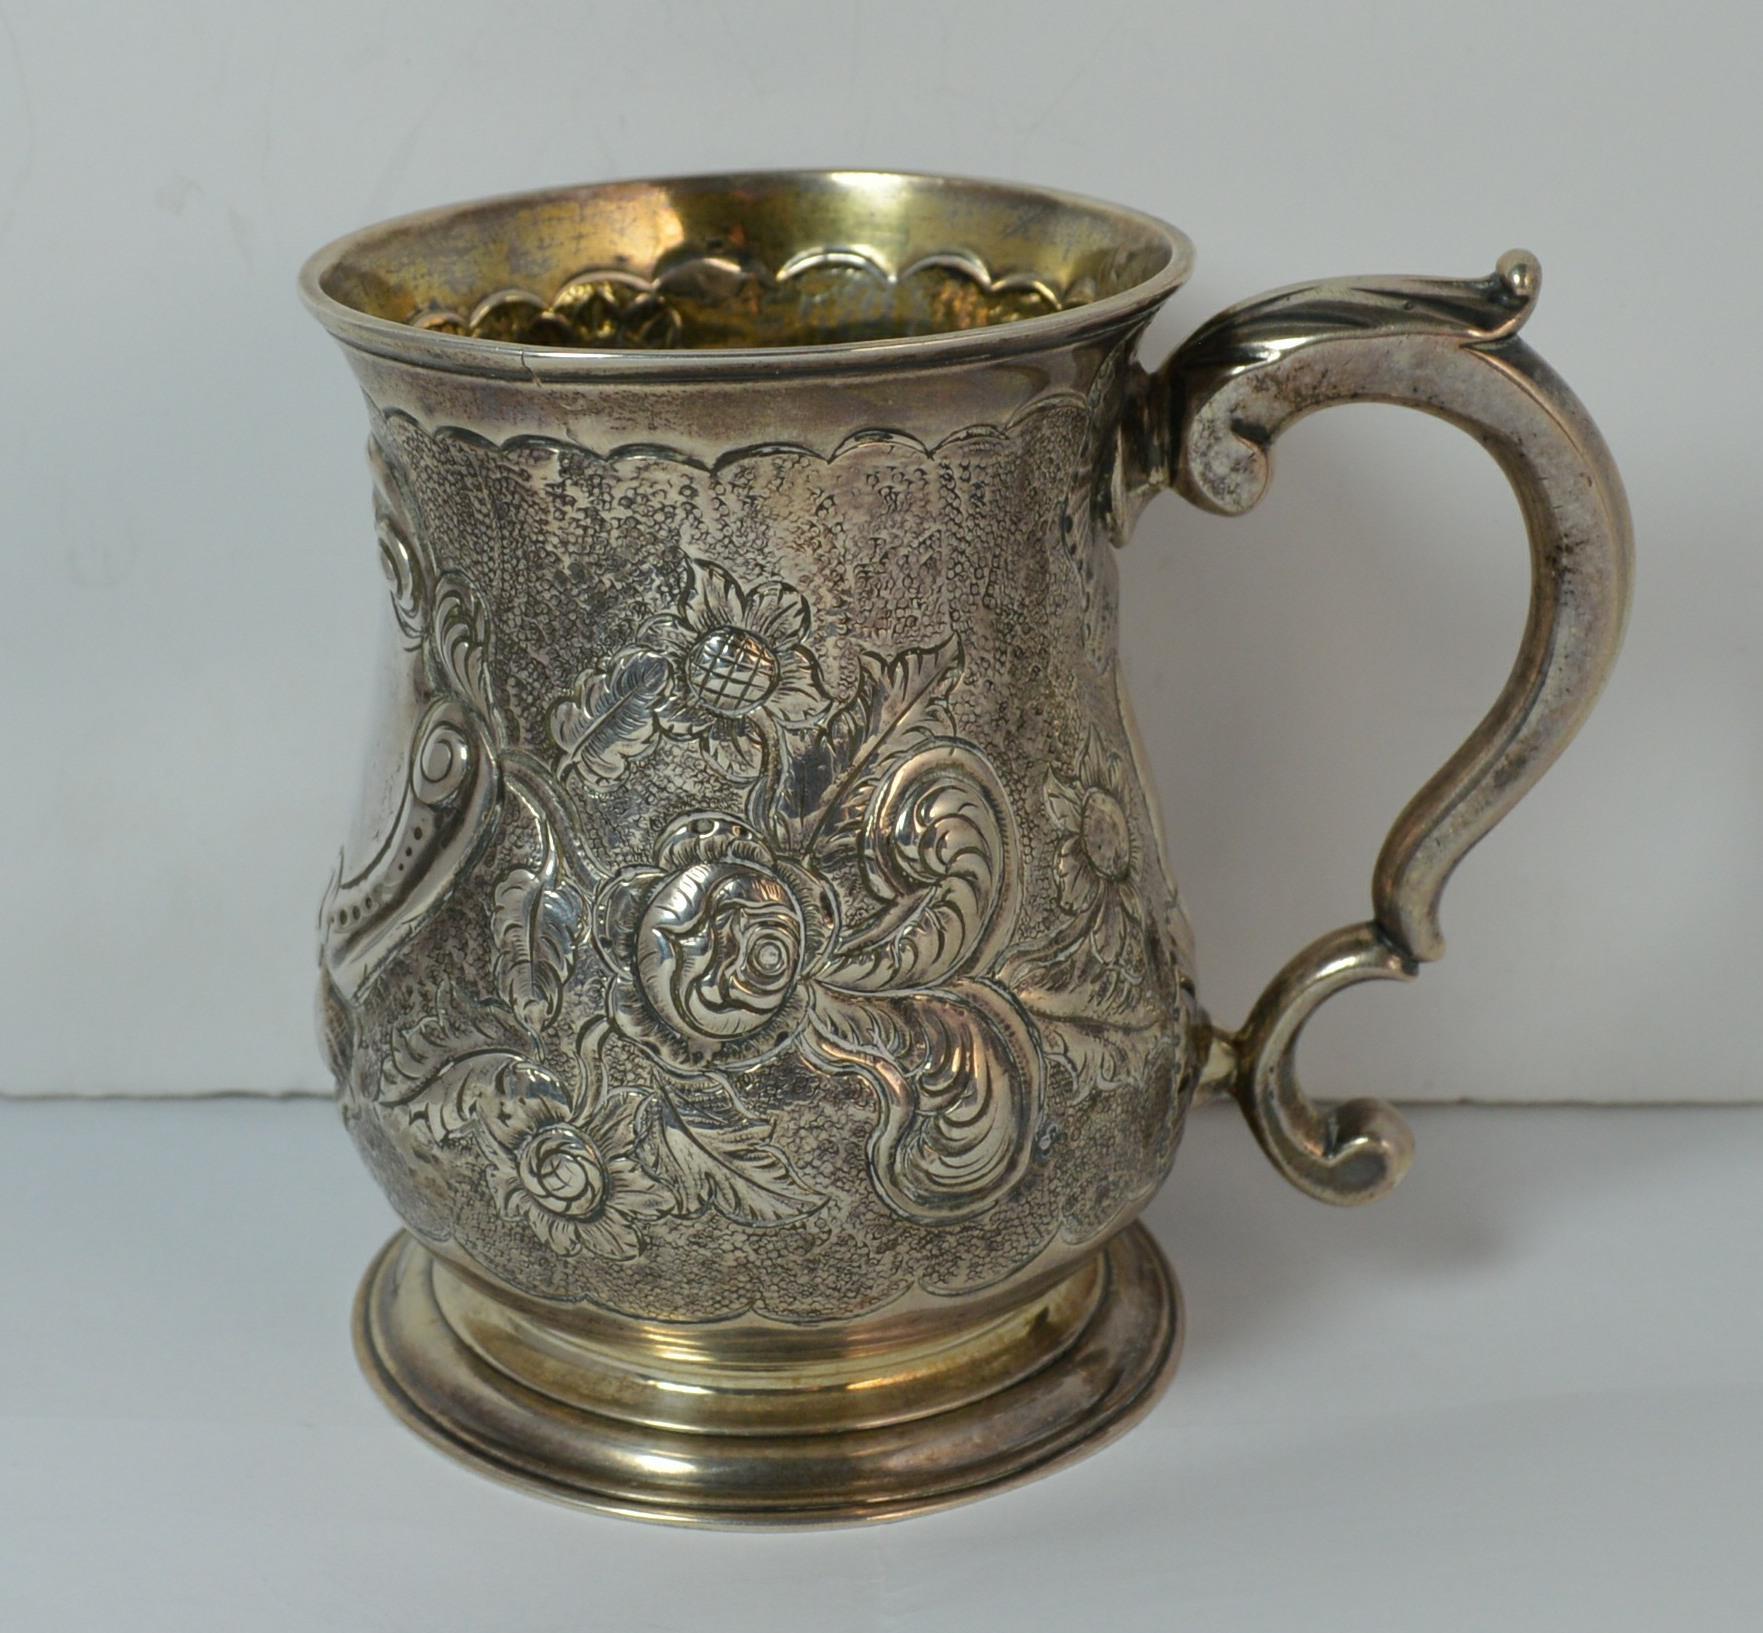 A quality sterling silver early Georgian two handled cup / porringer / bowl.

Finely made, plain, lightly hammered finish, all original.

Hallmarks ; lion, London assay, makers marks, date letter for 1755

Size ; 72mm diameter top, 96mm tall

Weight